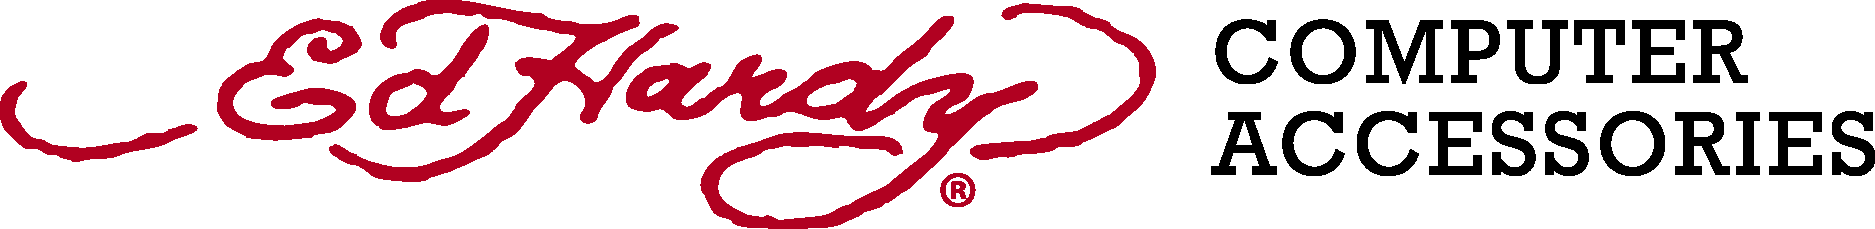 Ed Hardy Computer Accessories Logo Vector